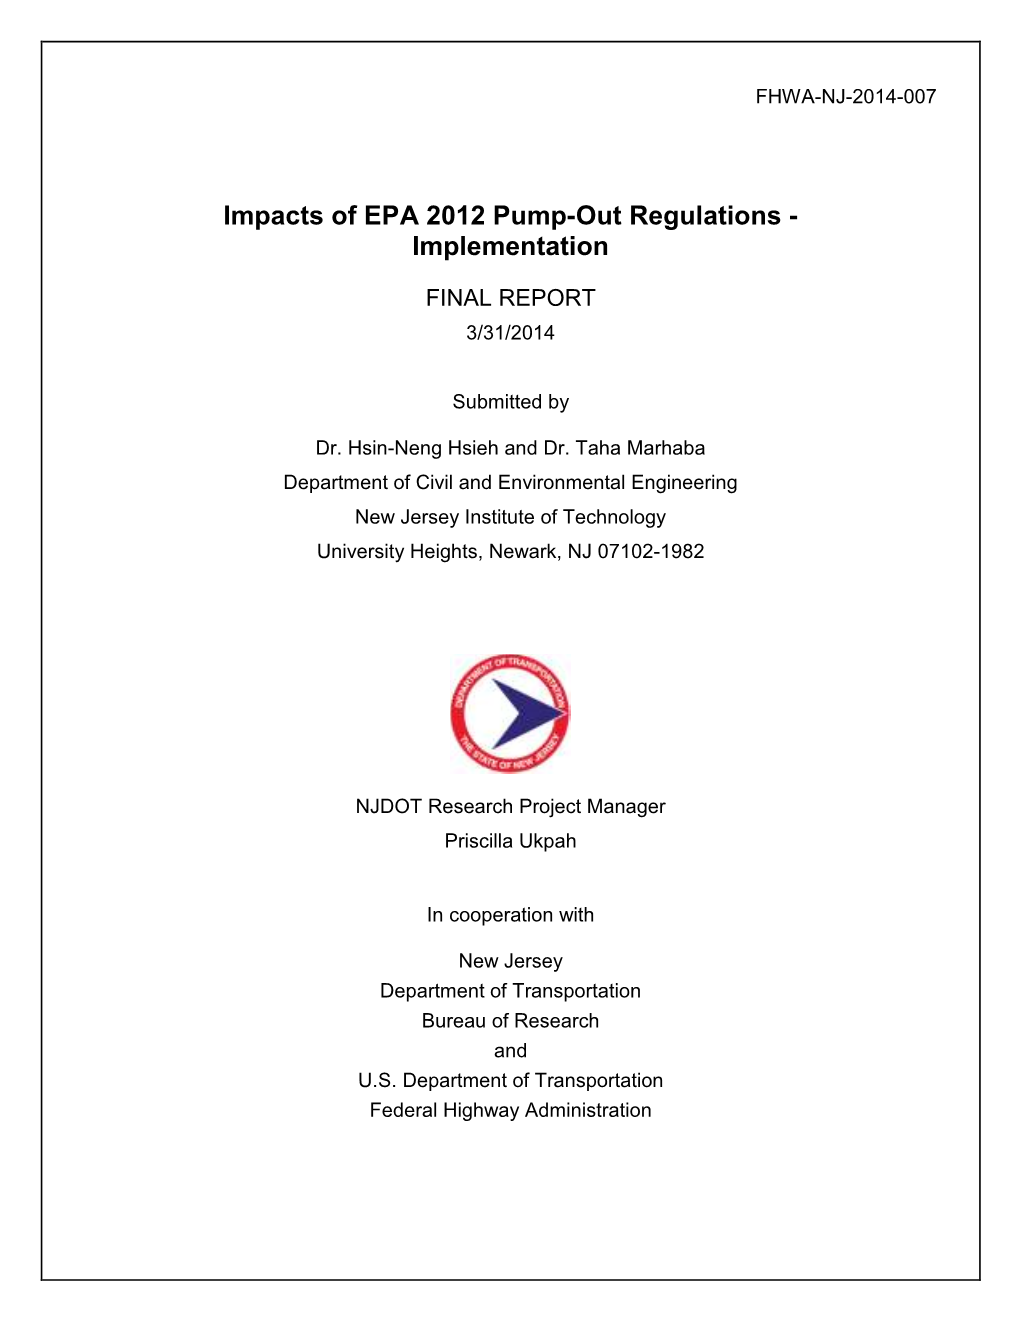 Impacts of EPA 2012 Pump-Out Regulations - Implementation